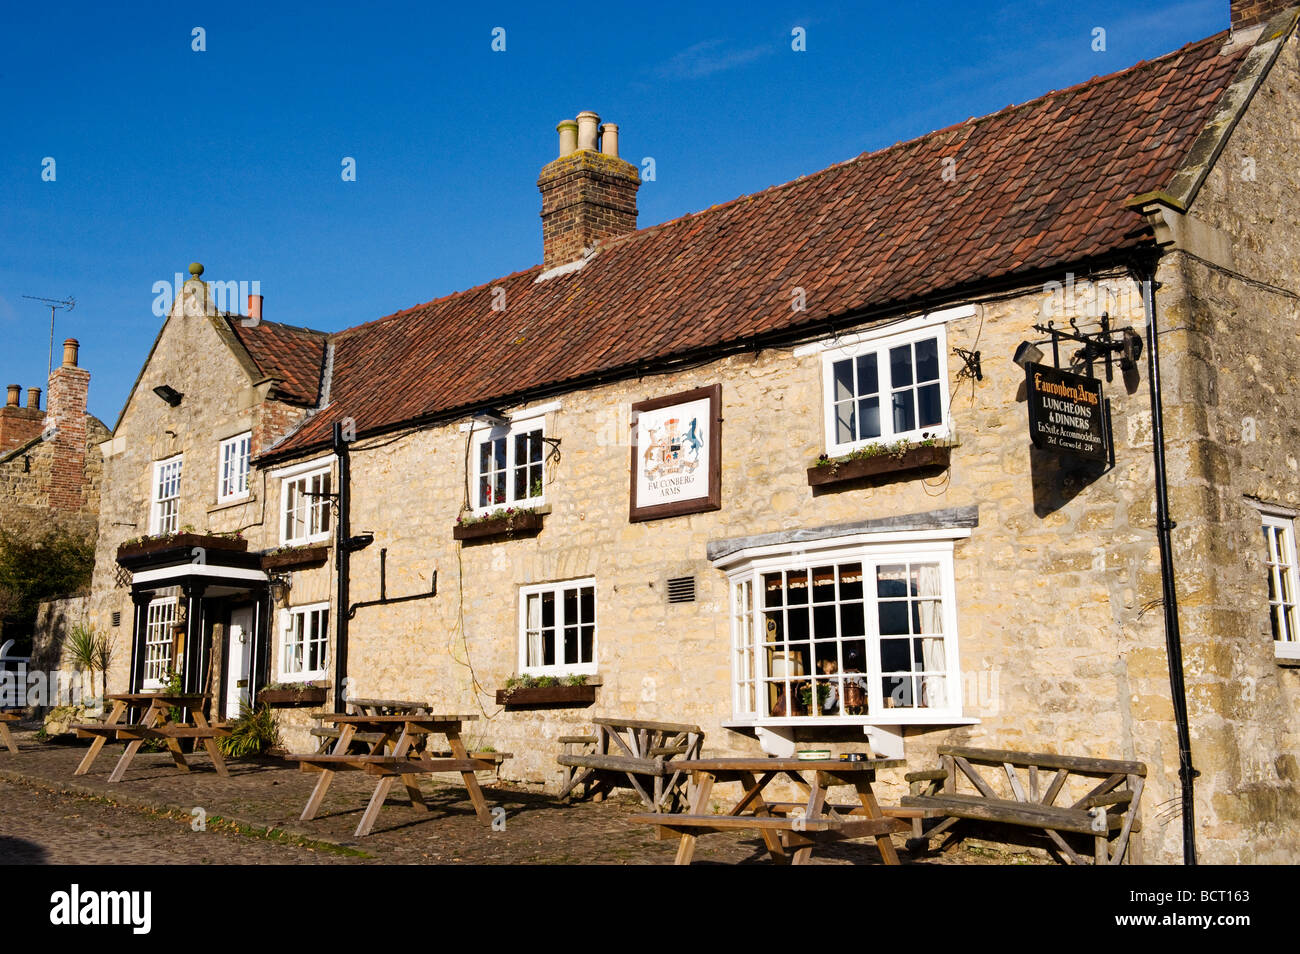 Fauconberg Arms Coxwold village North York Moors Yorkshire FOR EDITORIAL USE ONLY Stock Photo